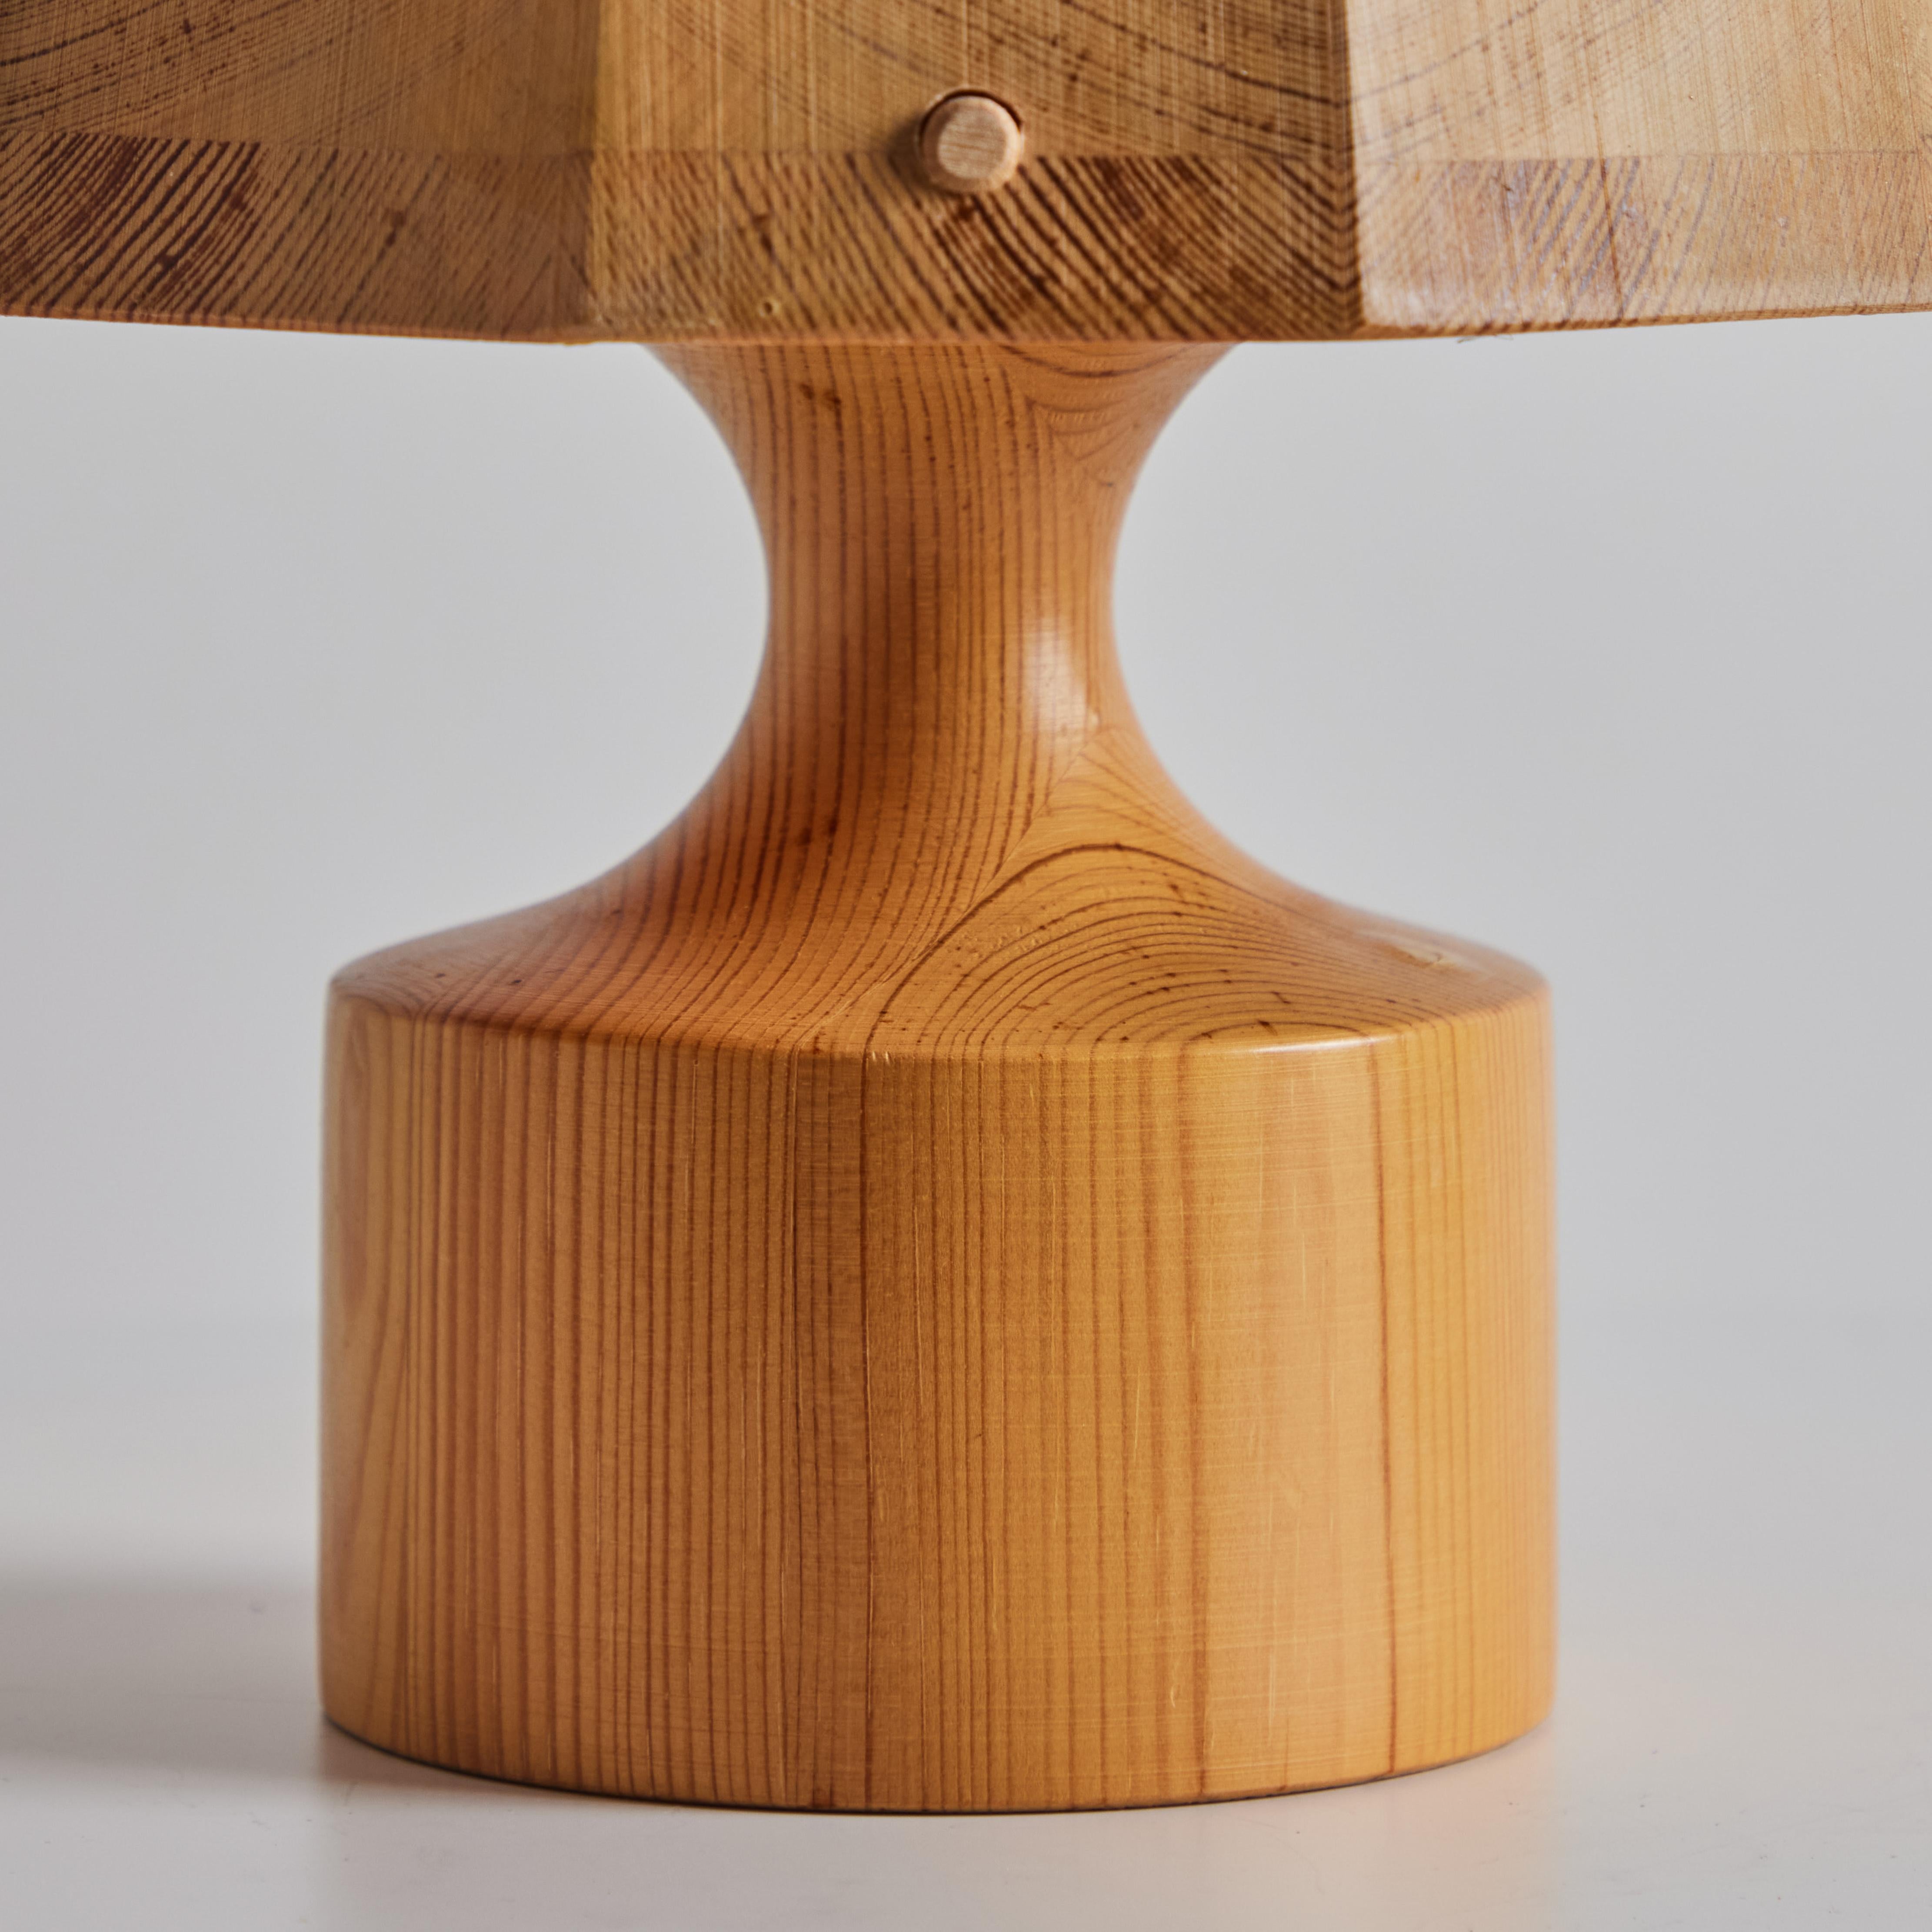 Pair of 1960s Wood Table Lamps Attributed to Hans-Agne Jakobsson for AB Ellysett For Sale 11